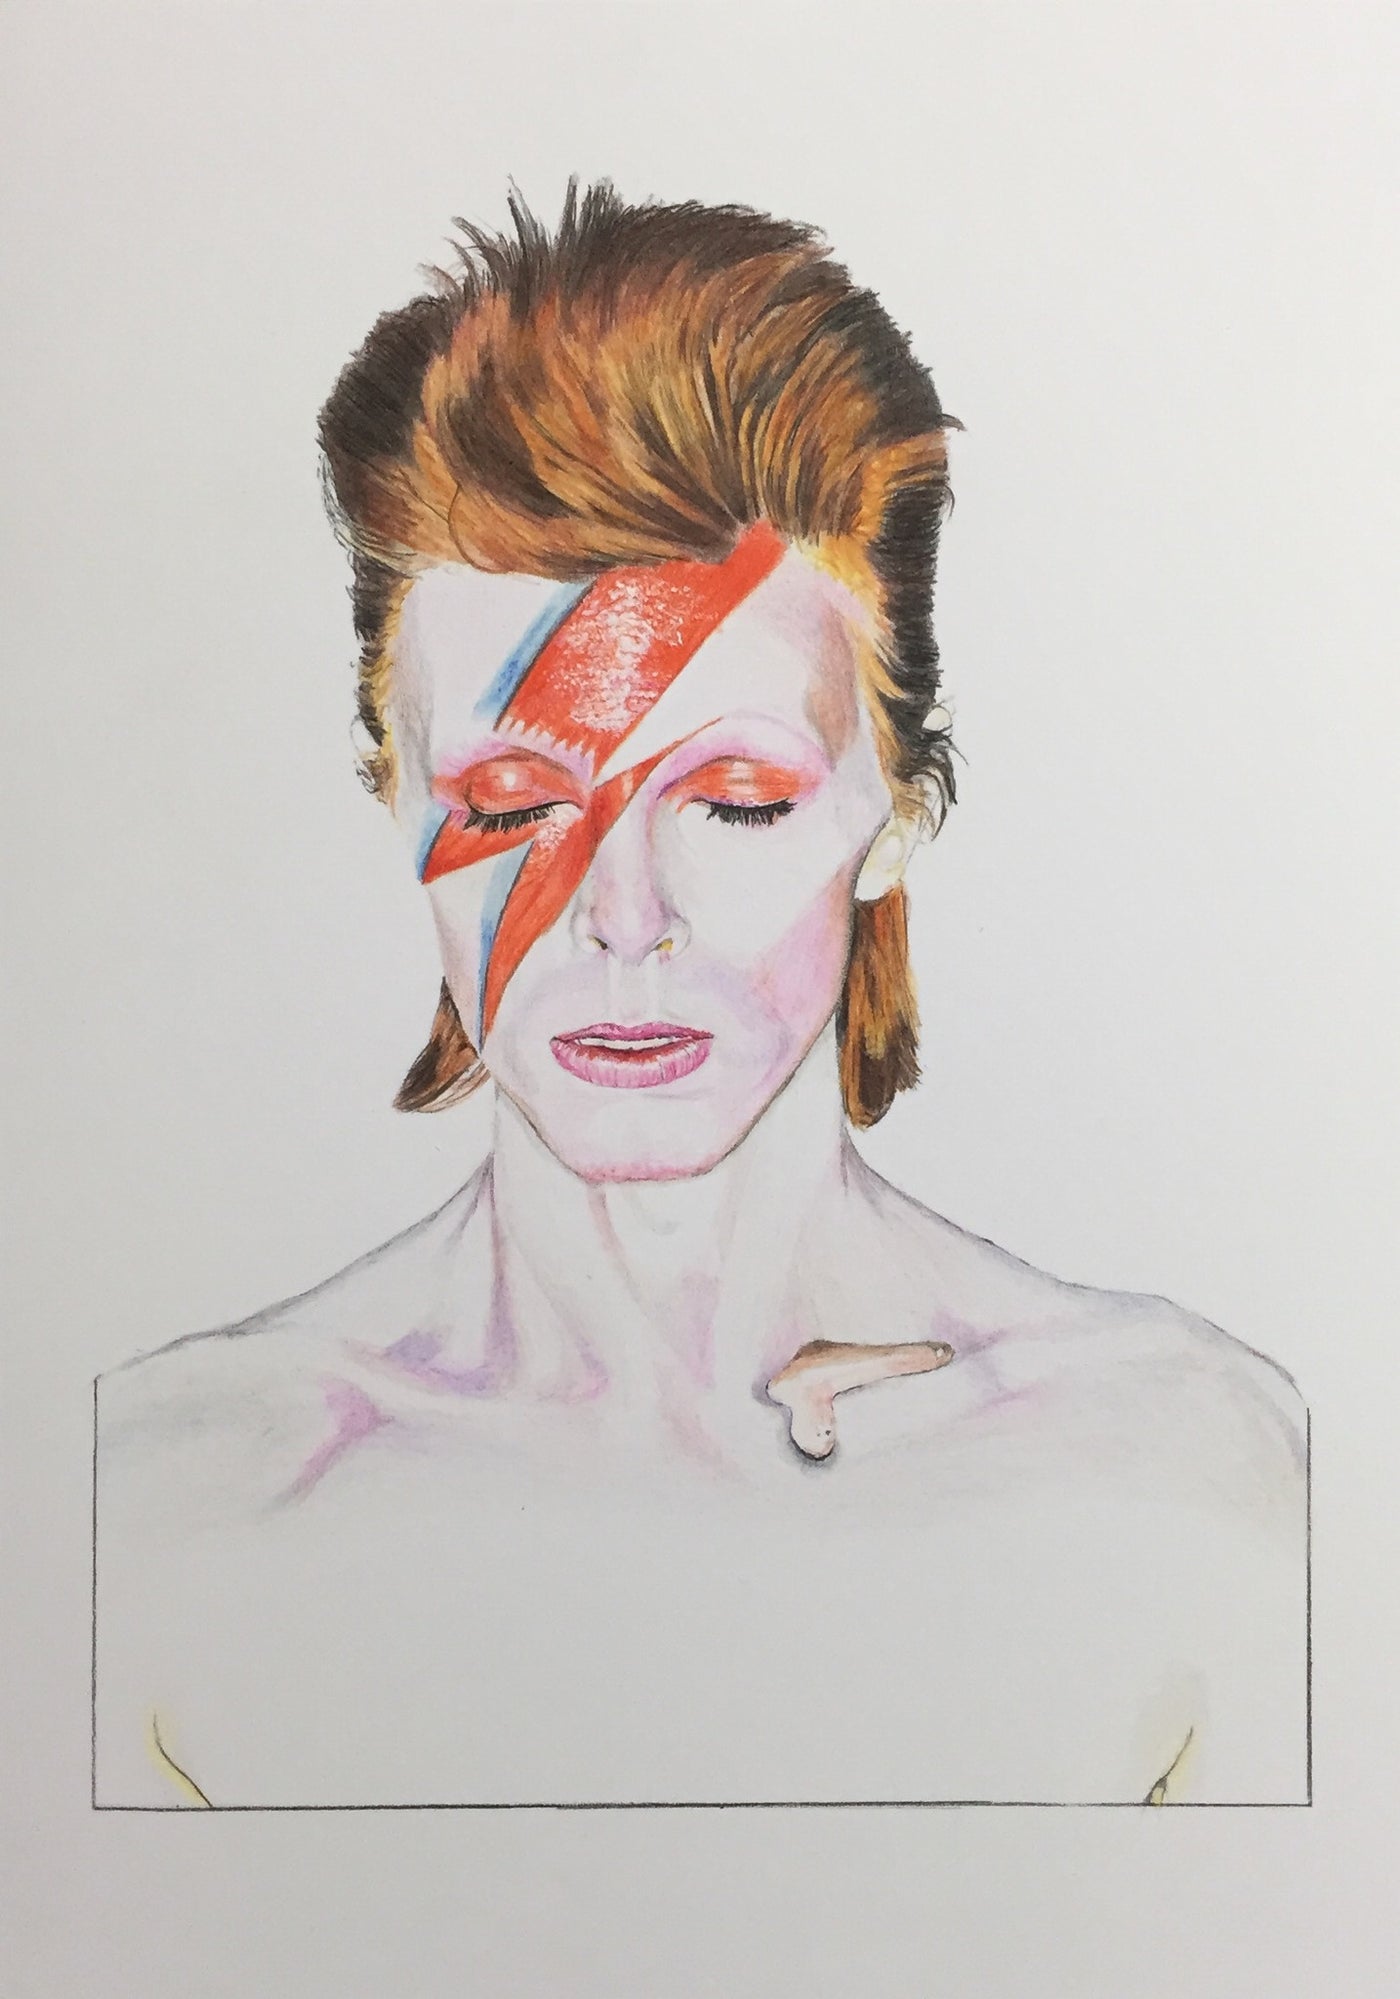 'David Bowie' by Edward Lacey - Green Gallery